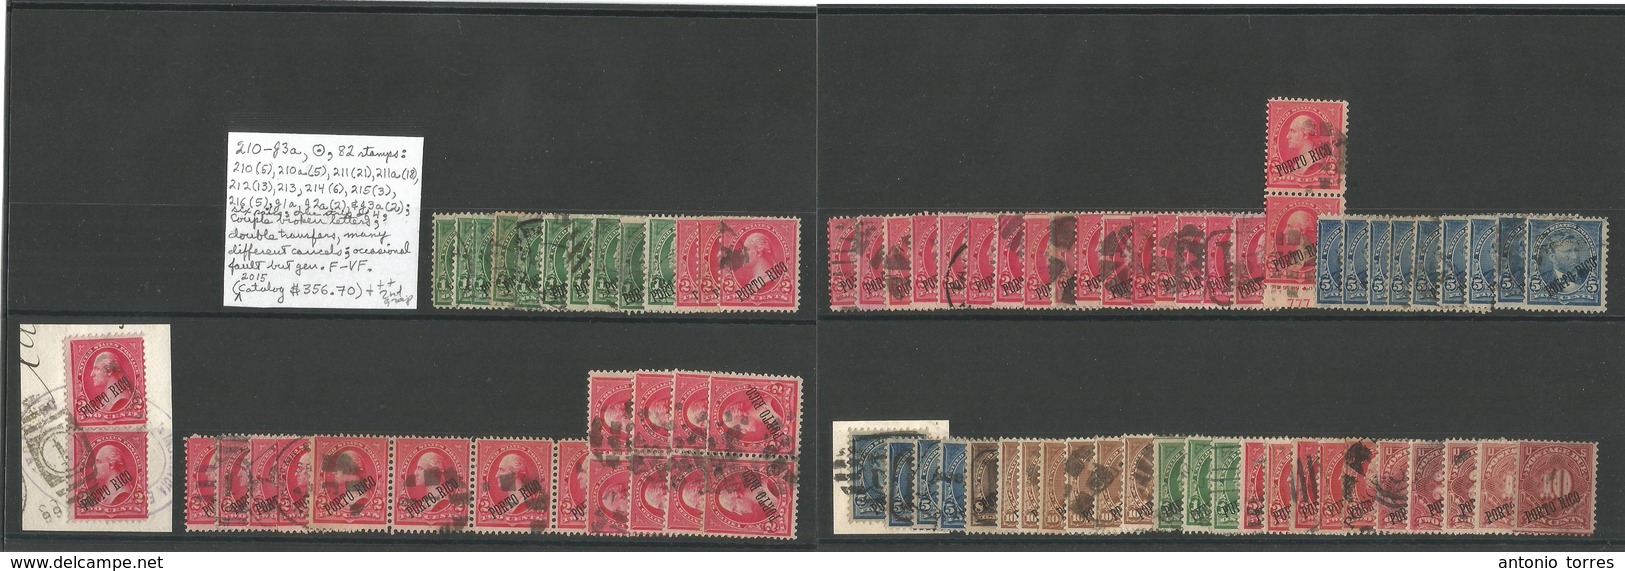 PUERTO RICO. 1898-9. US Period. Ovptd Issue PORTO RICO. High Catalogue Value In Two Stock Cards With Variety Of Cancels, - Porto Rico